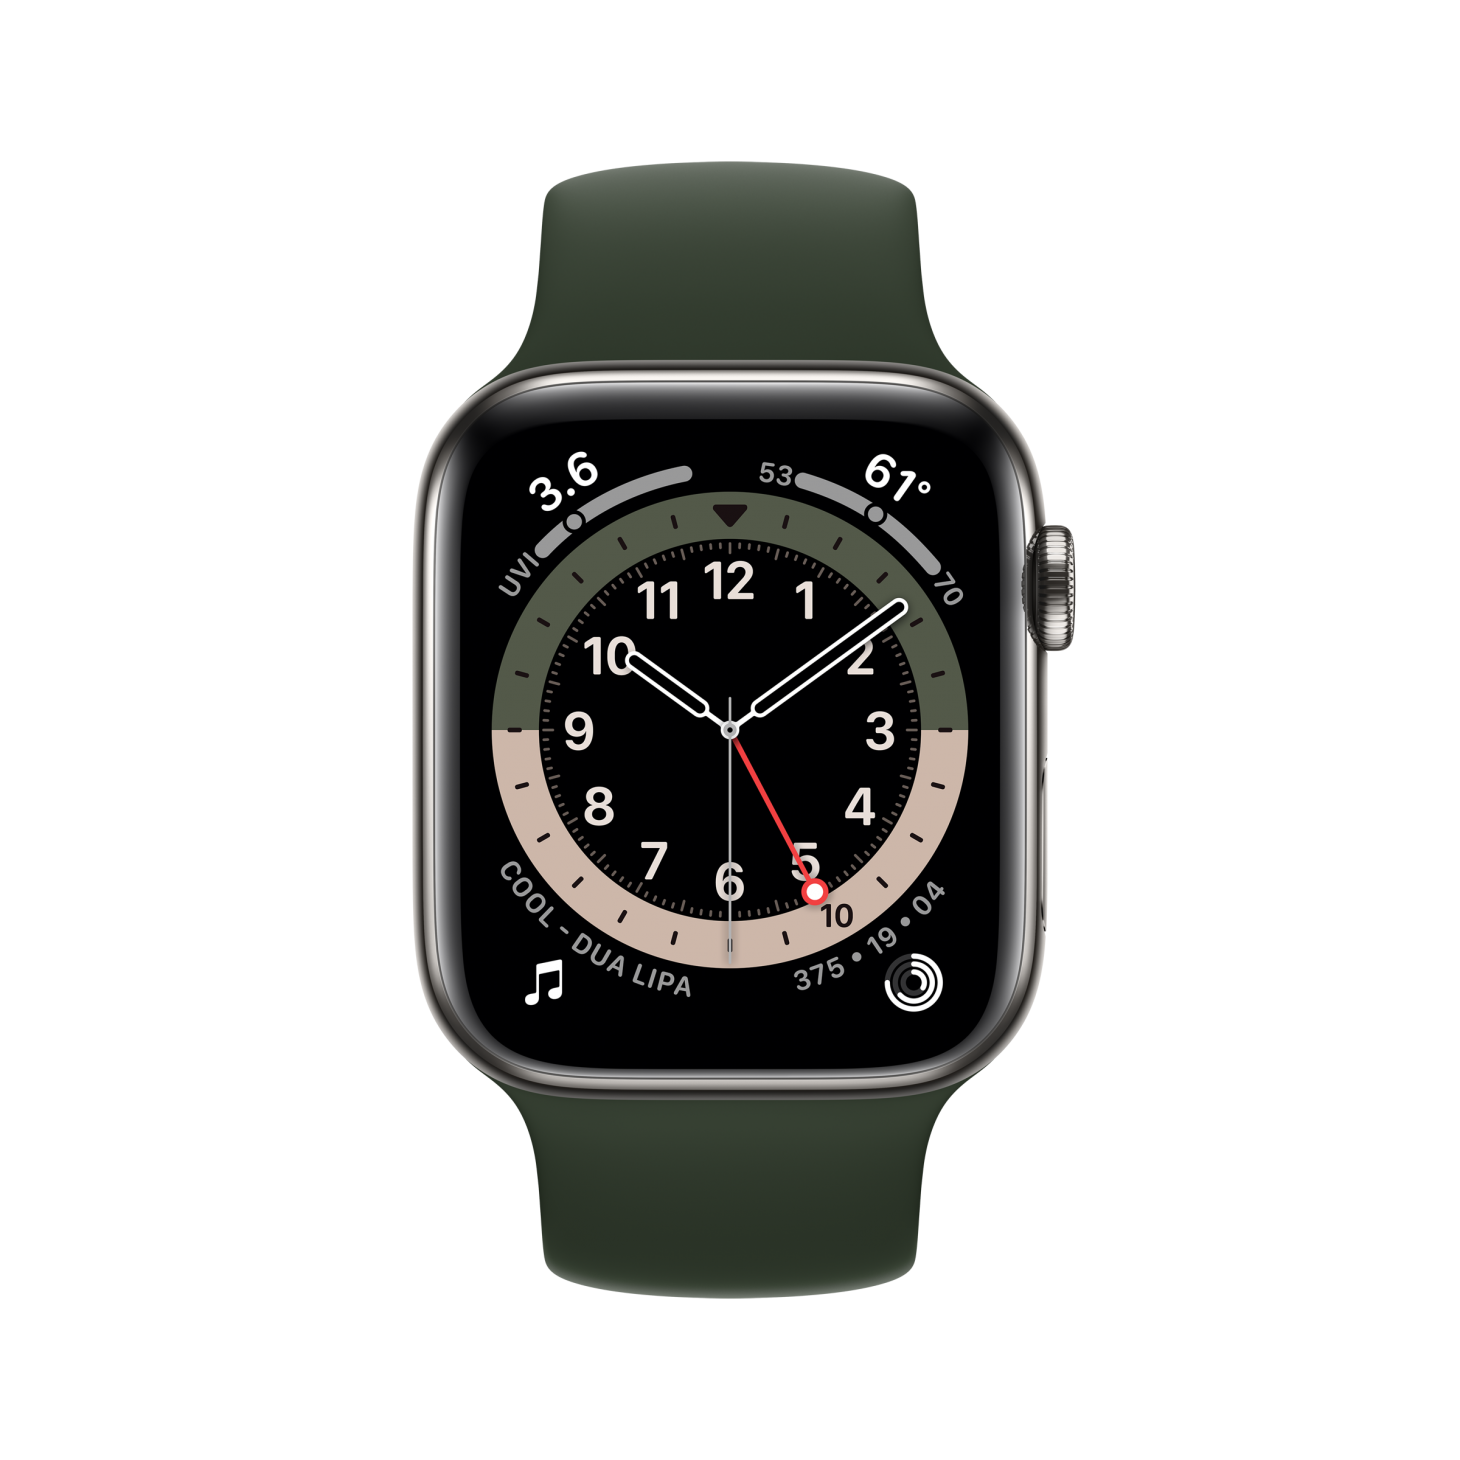 Apple Watch Series 5 PNG Transparent Images, Pictures, Photos | PNG Arts